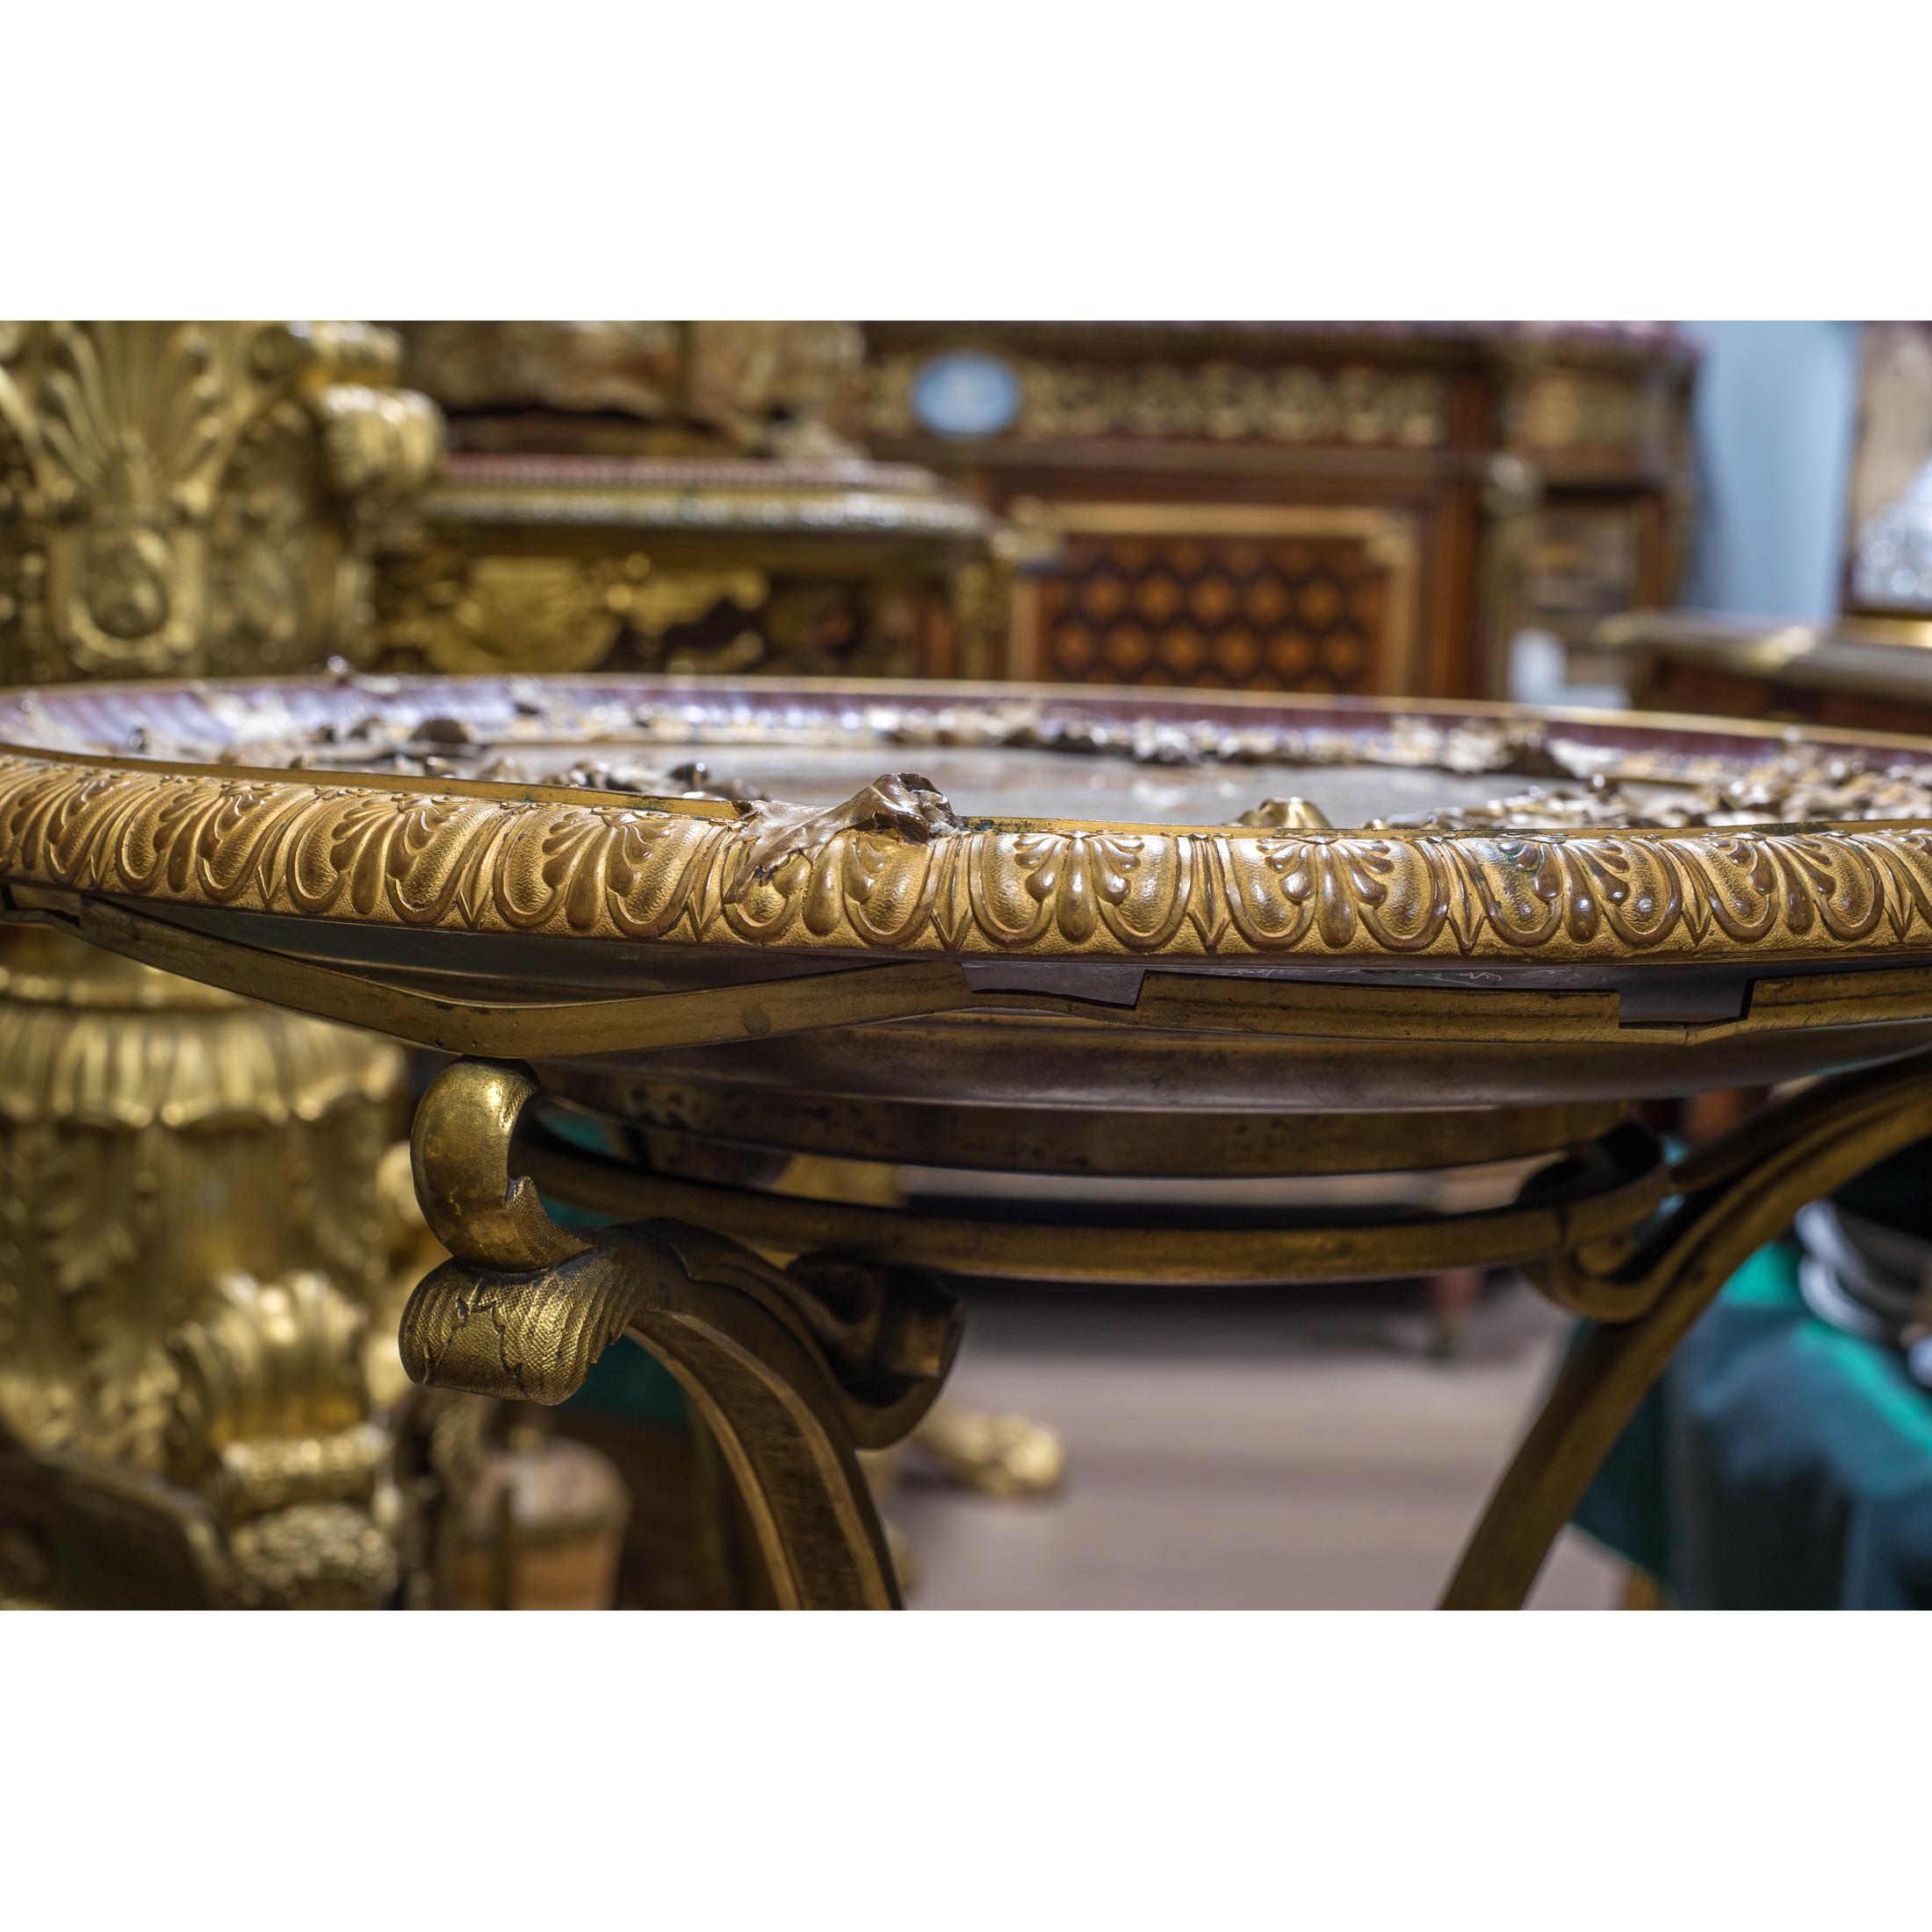 19th Century French Ormolu-Mounted, Polychrome, Patinated Bronze and Onyx Gueridon